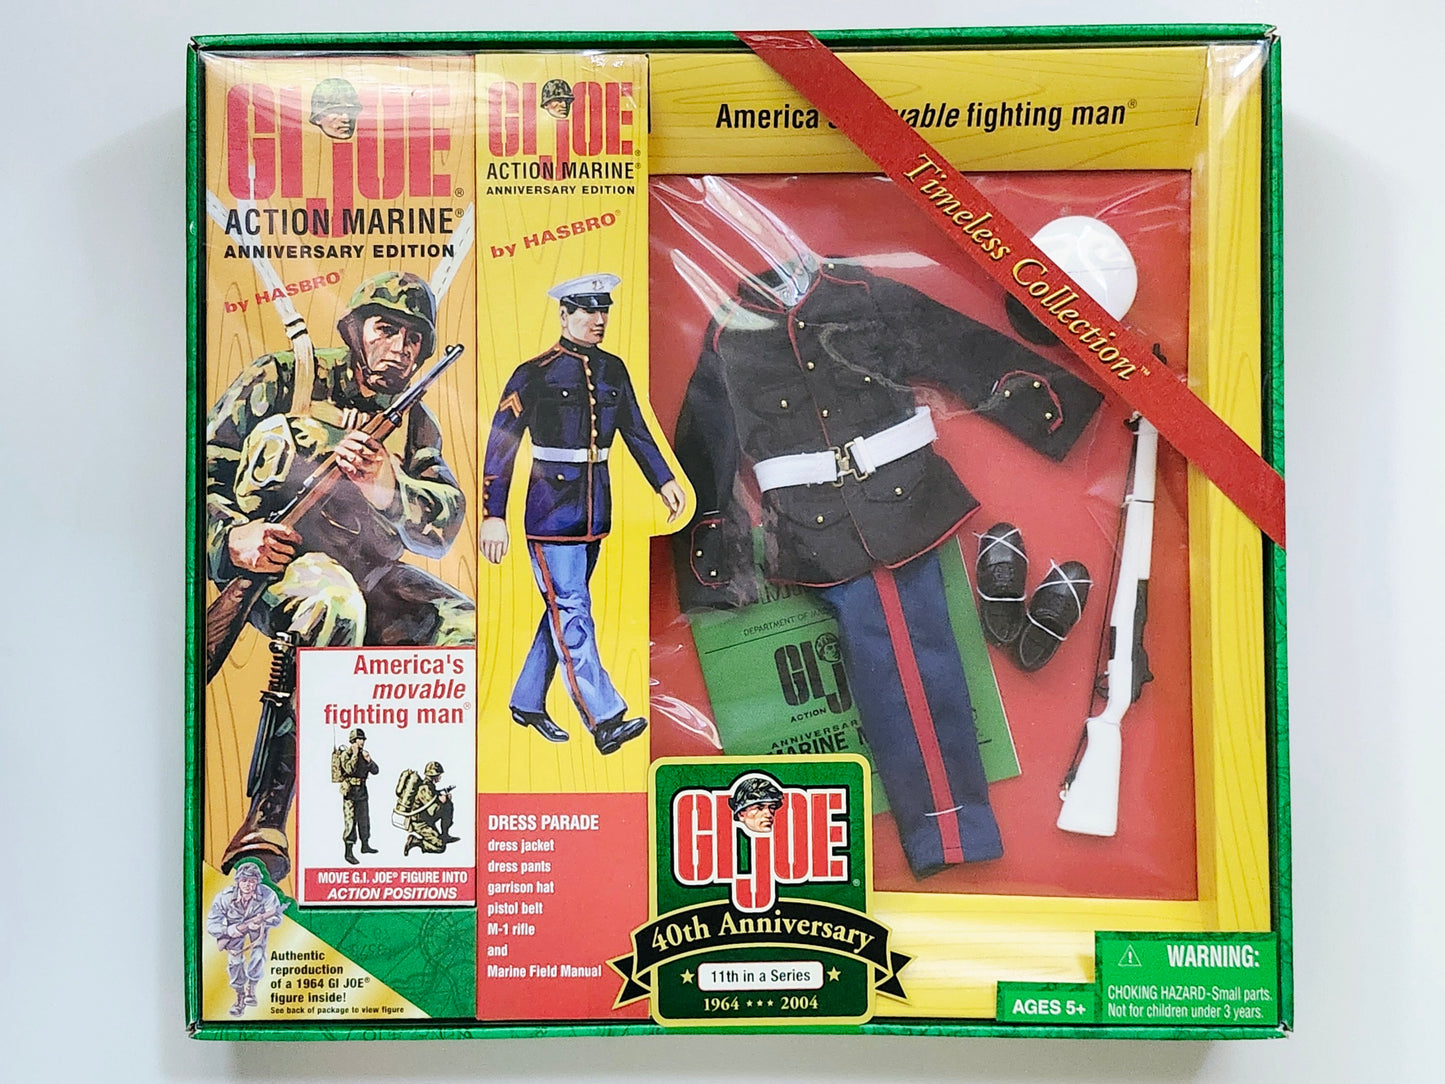 G.I. Joe 40th Anniversary Action Marine with Dress Parade 12-Inch Action Figure Set 11th in a Series